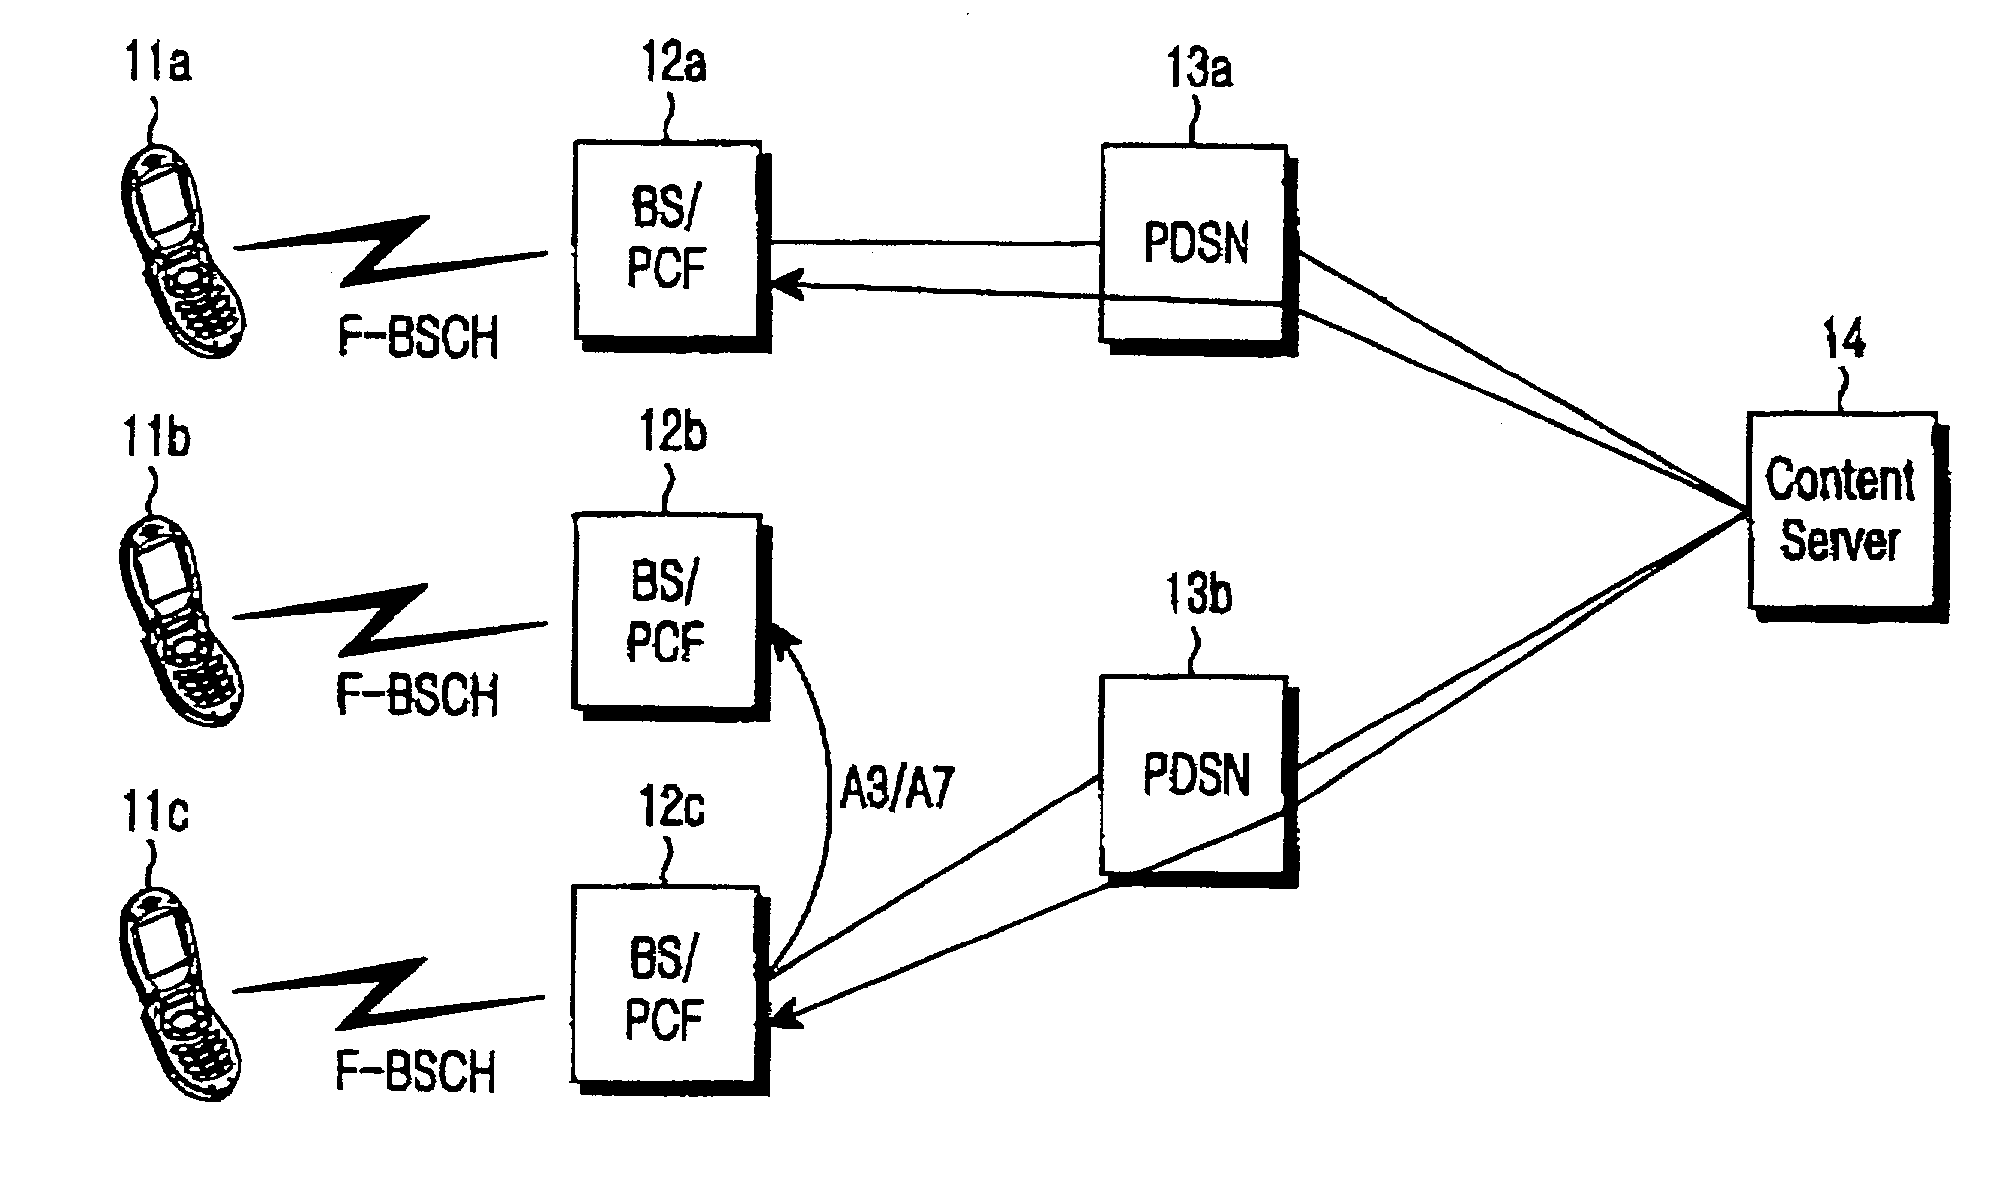 Method for providing broadcast service in a CDMA mobile communication system